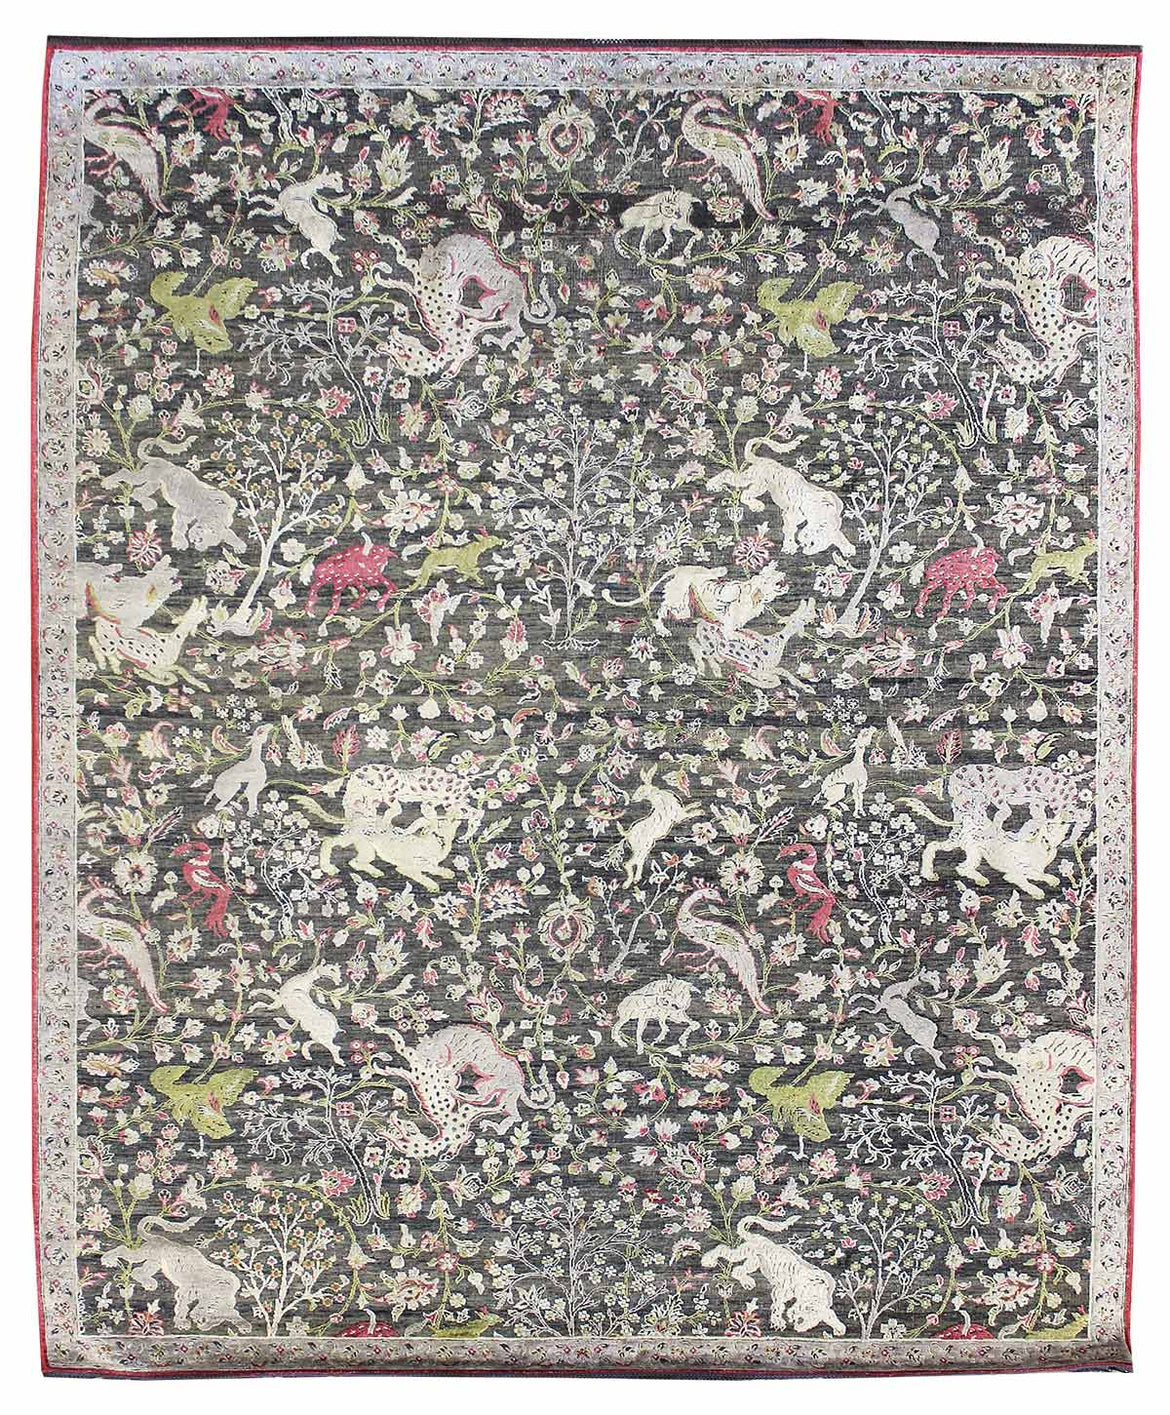 Transitional Rug of the Month: April